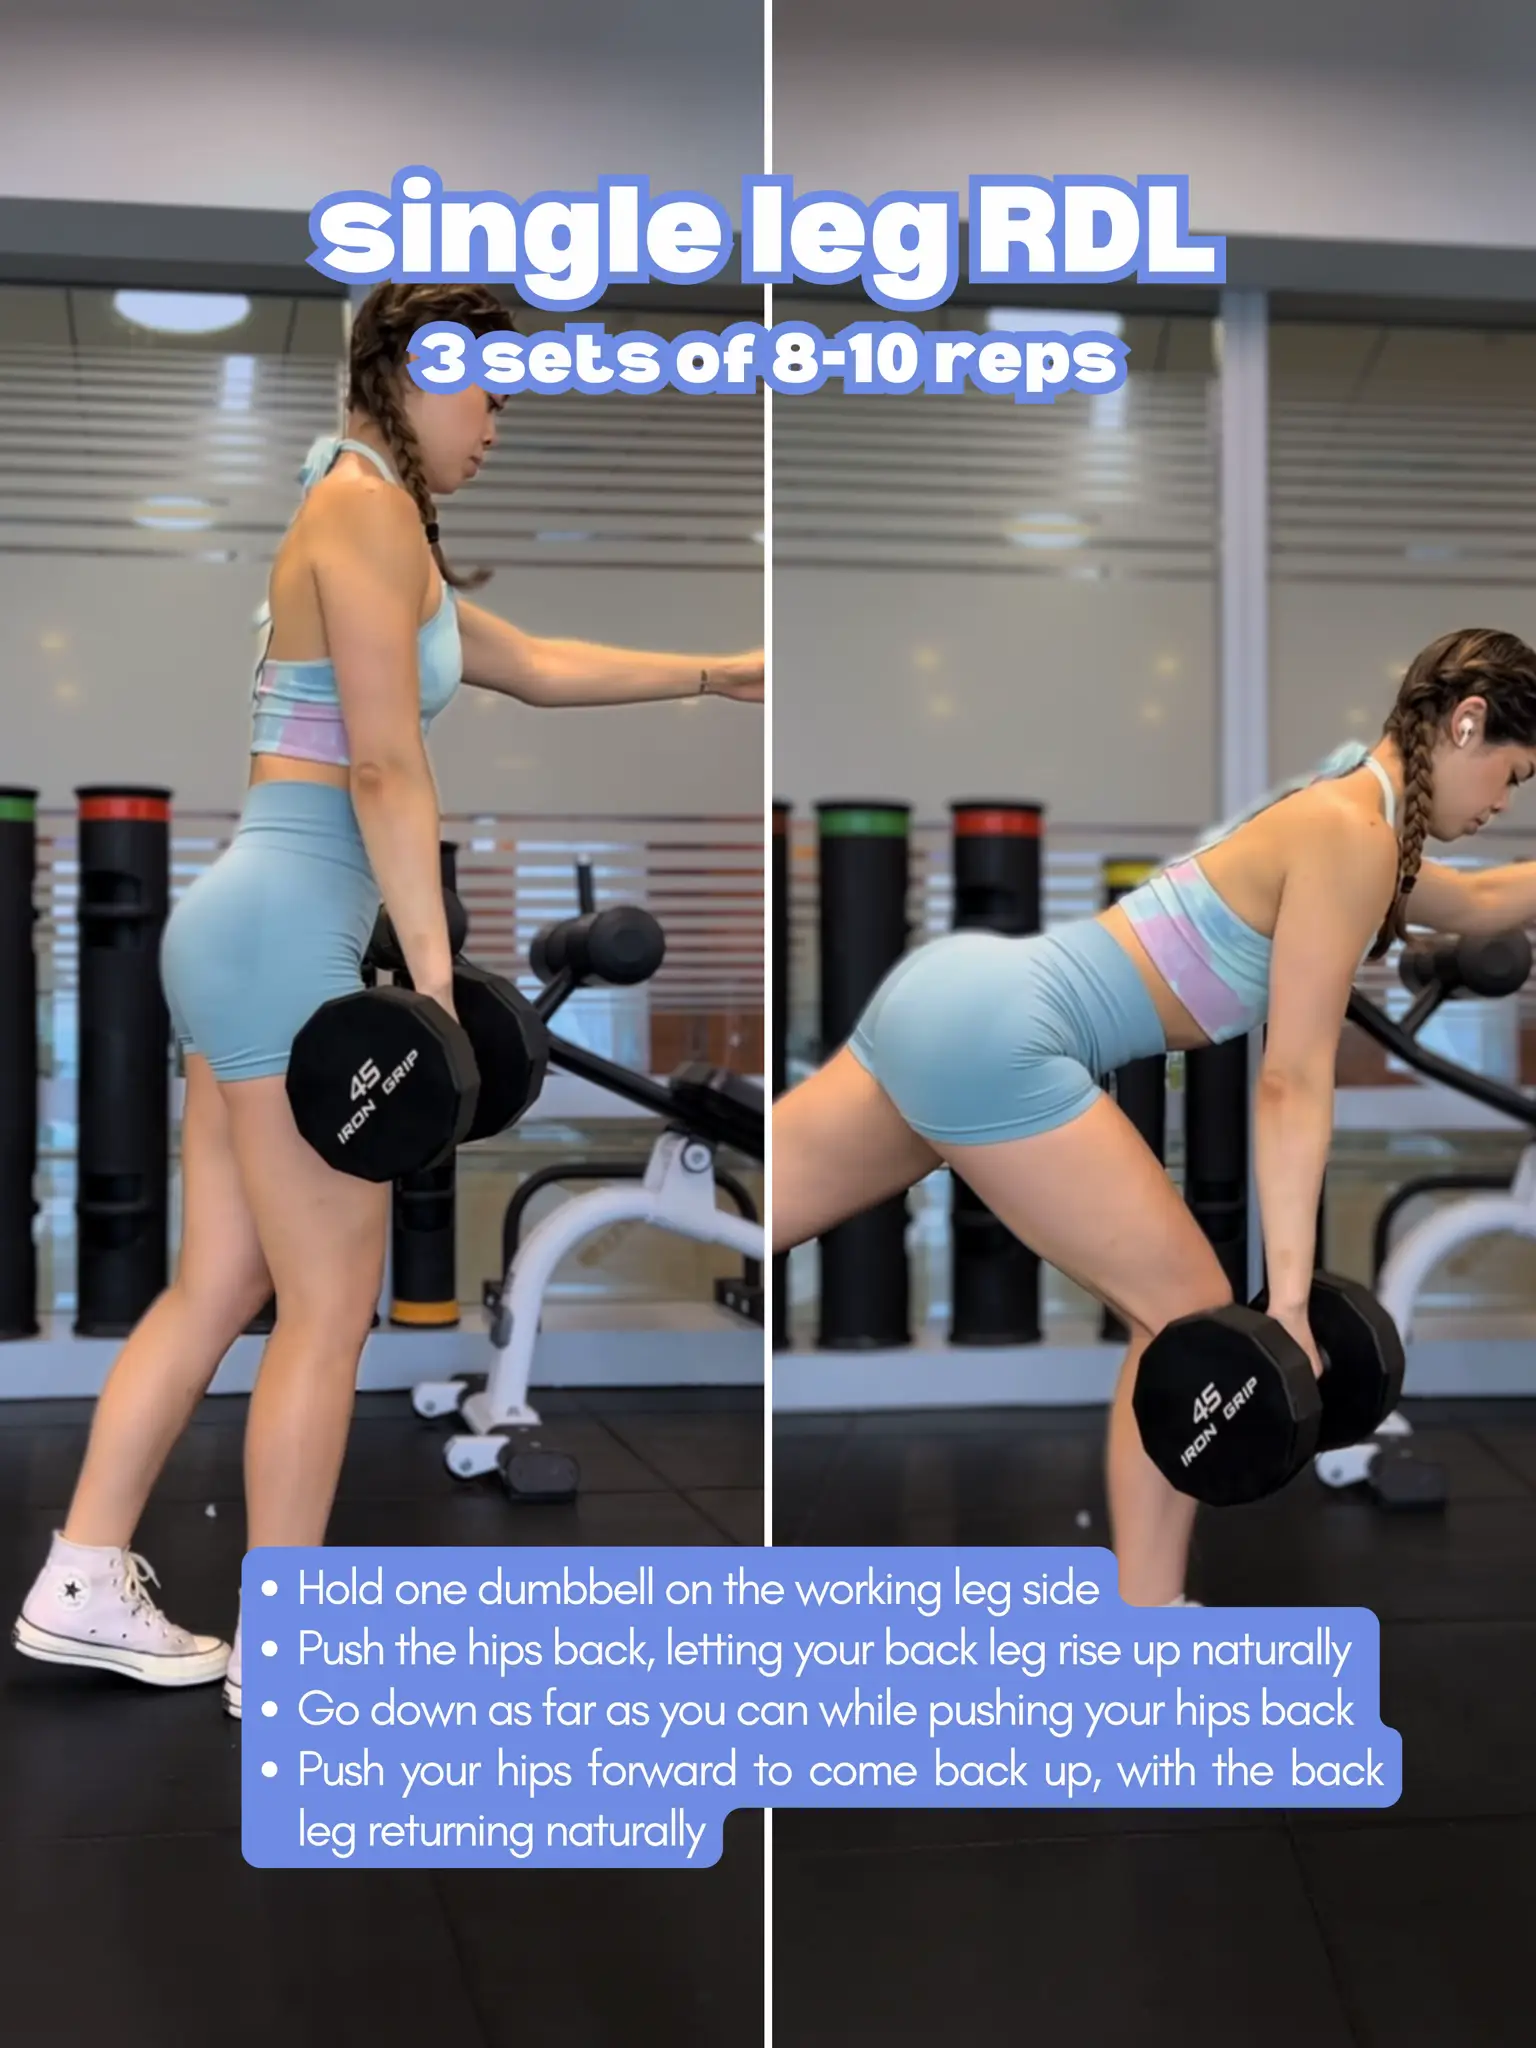 My Go-To Favorite Compound Leg Exercises, Gallery posted by Gianna Cestone